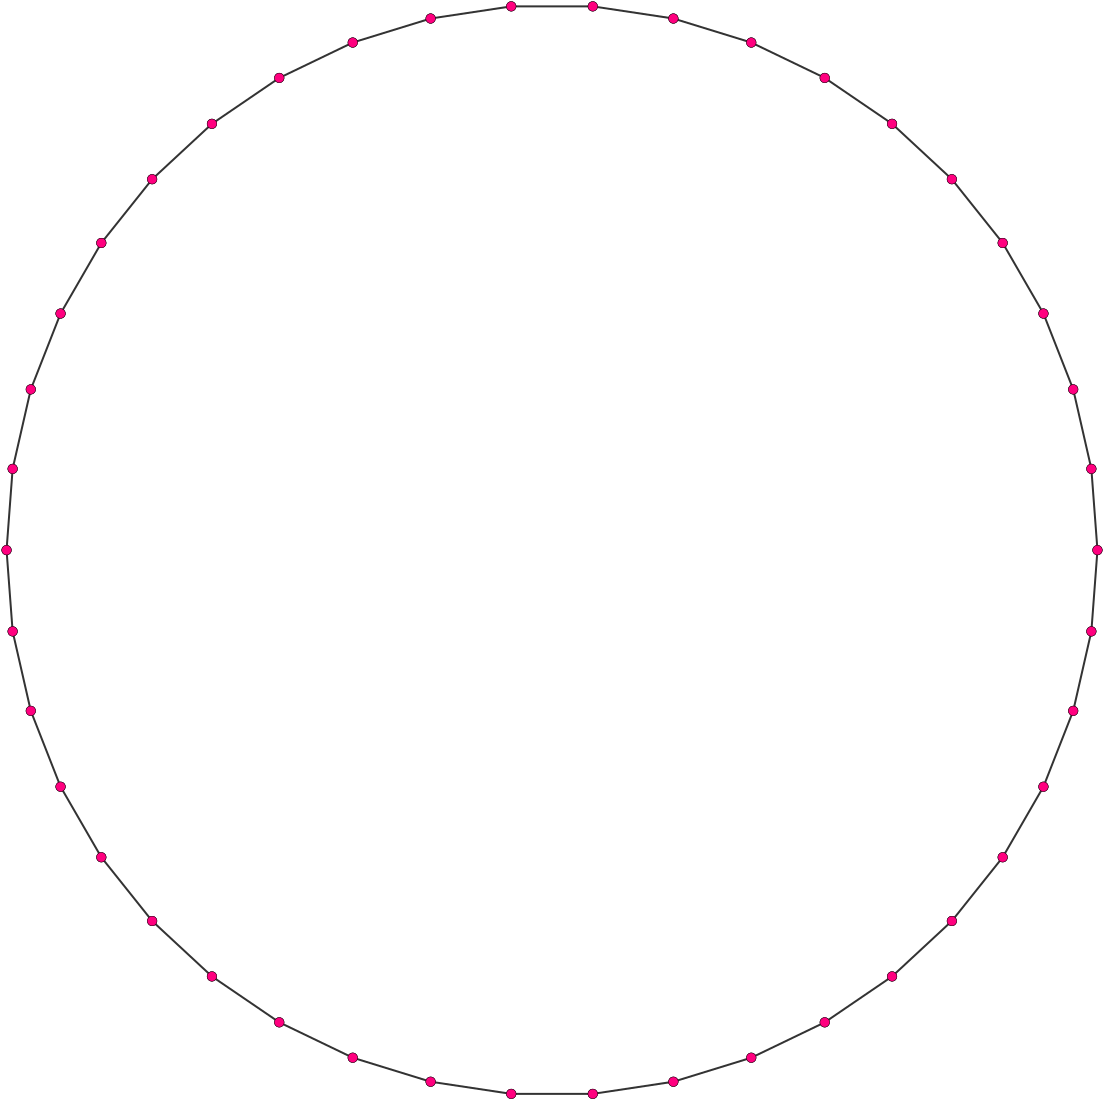 Dotted Circle Outline Graphic PNG